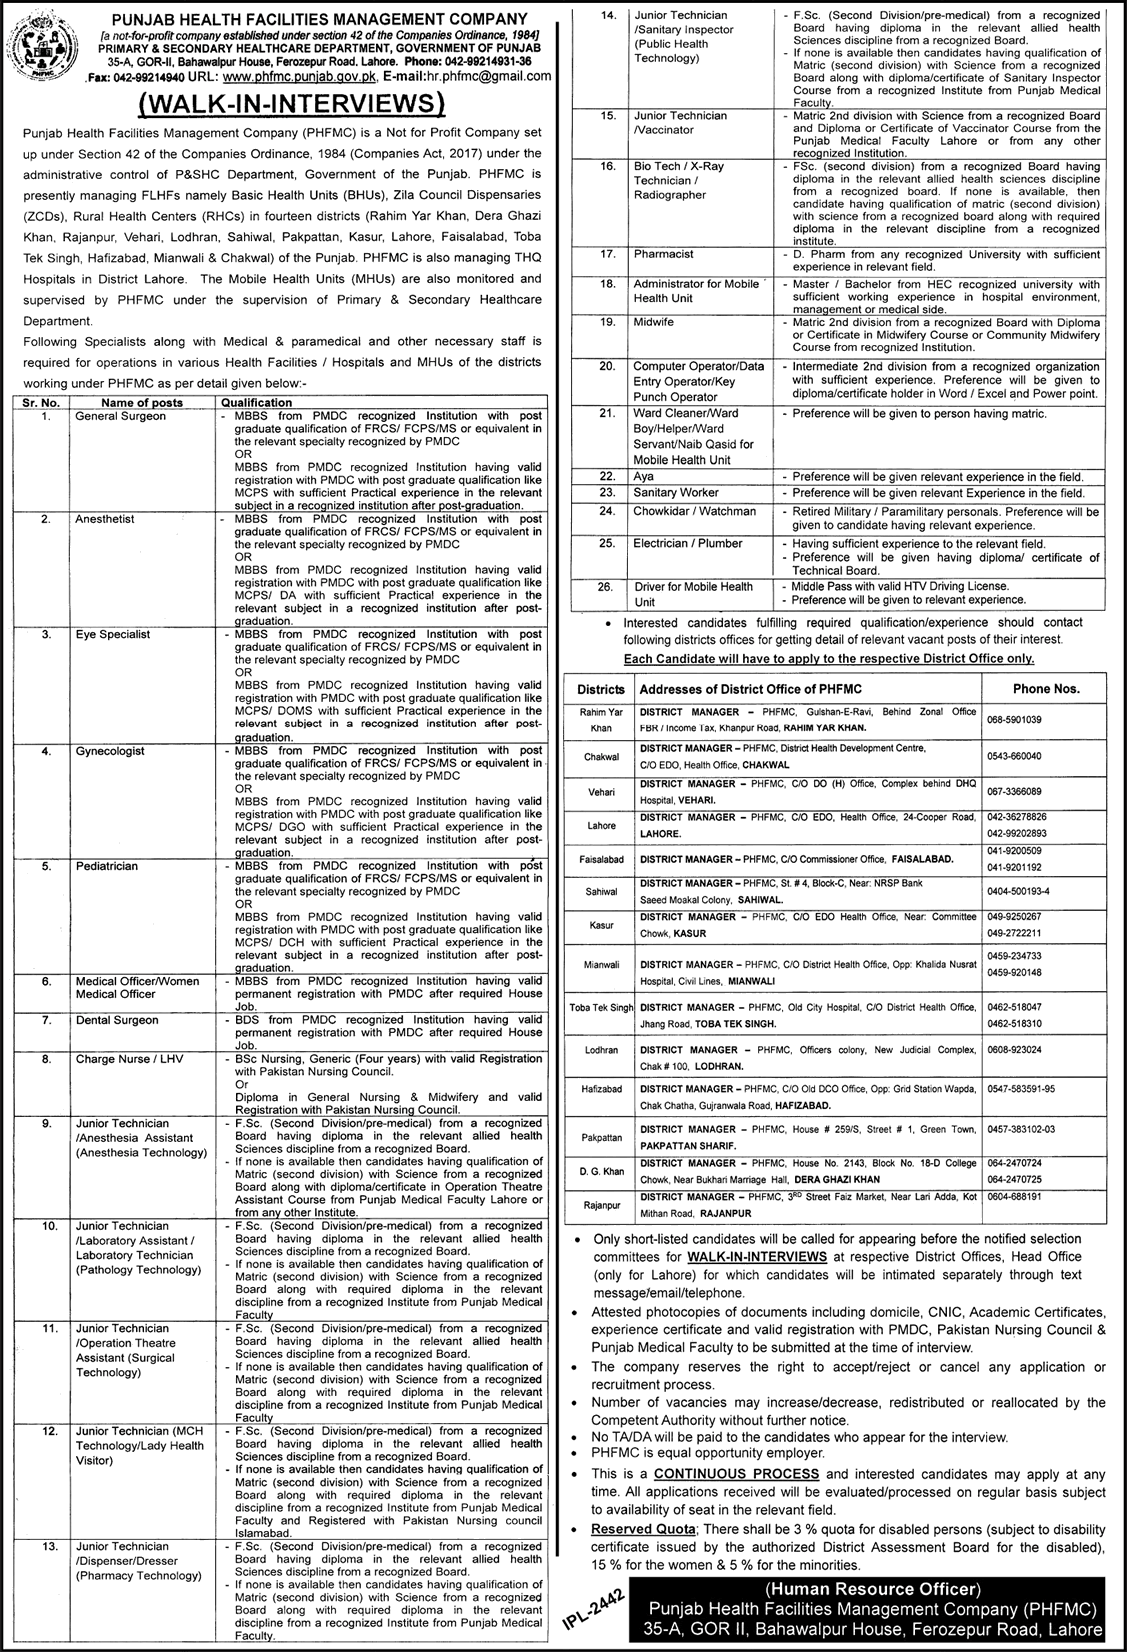 Punjab Health Facilities Management Company Jobs 2019 March Walk In Interview Latest